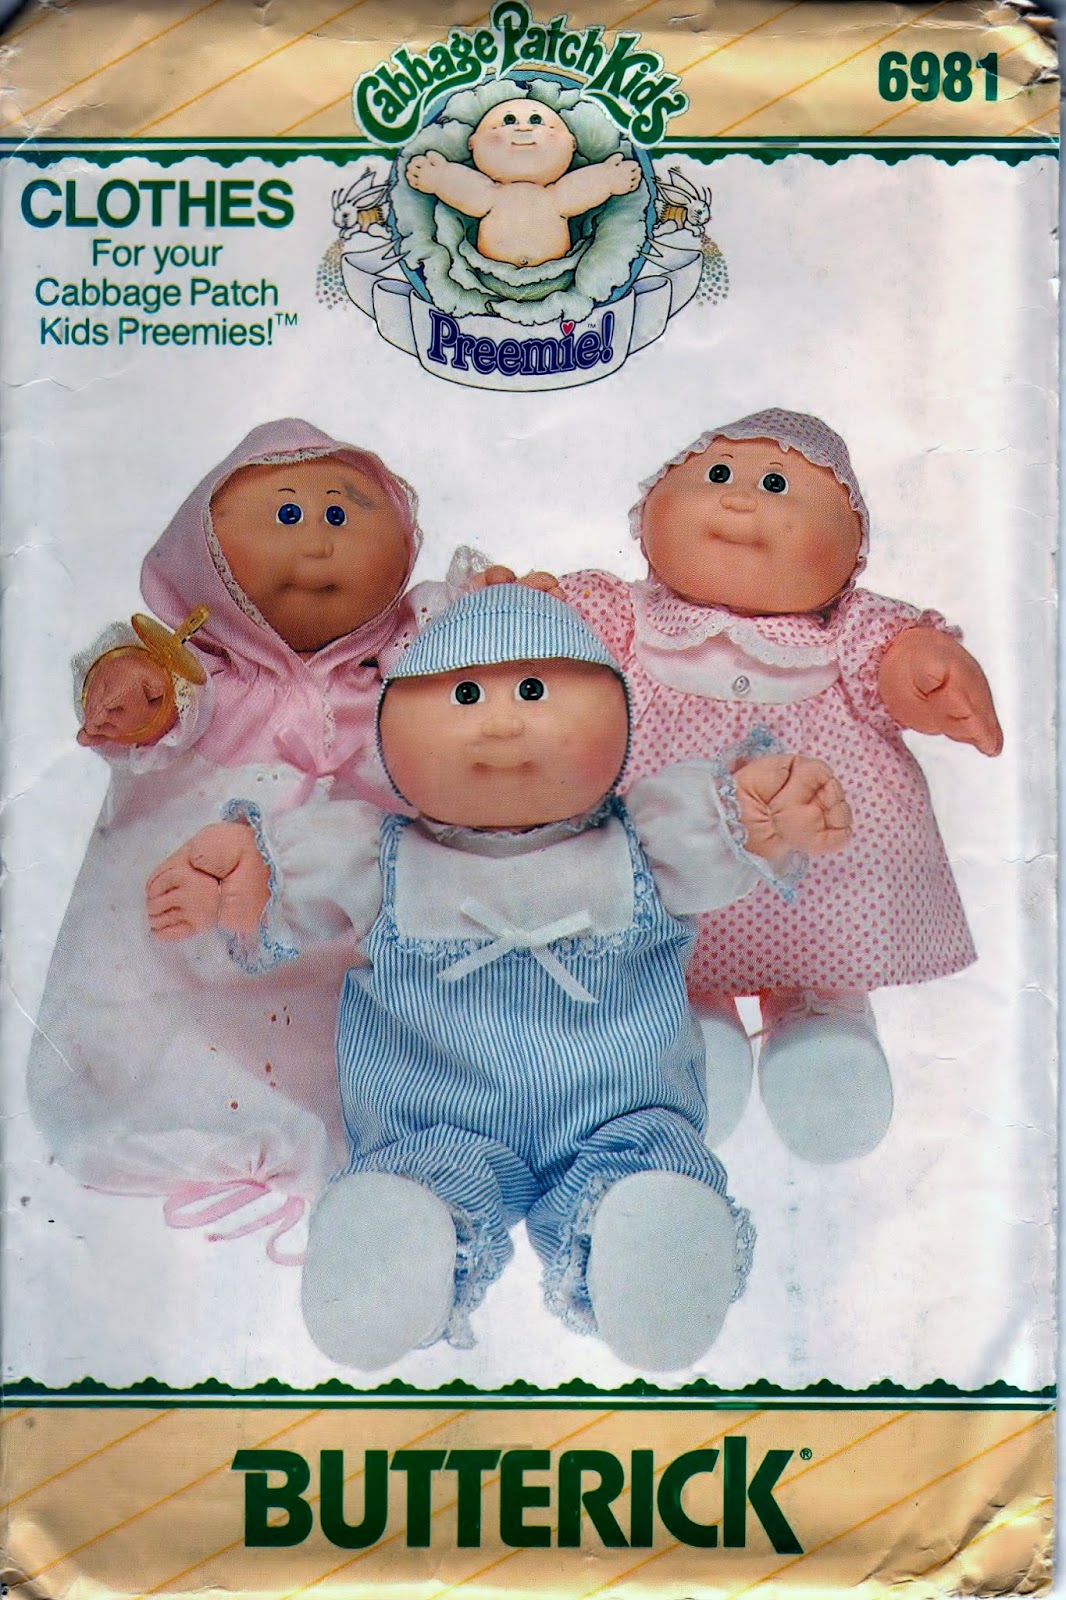 https://www.etsy.com/listing/114559237/cabbage-patch-preemie-clothes-uncut